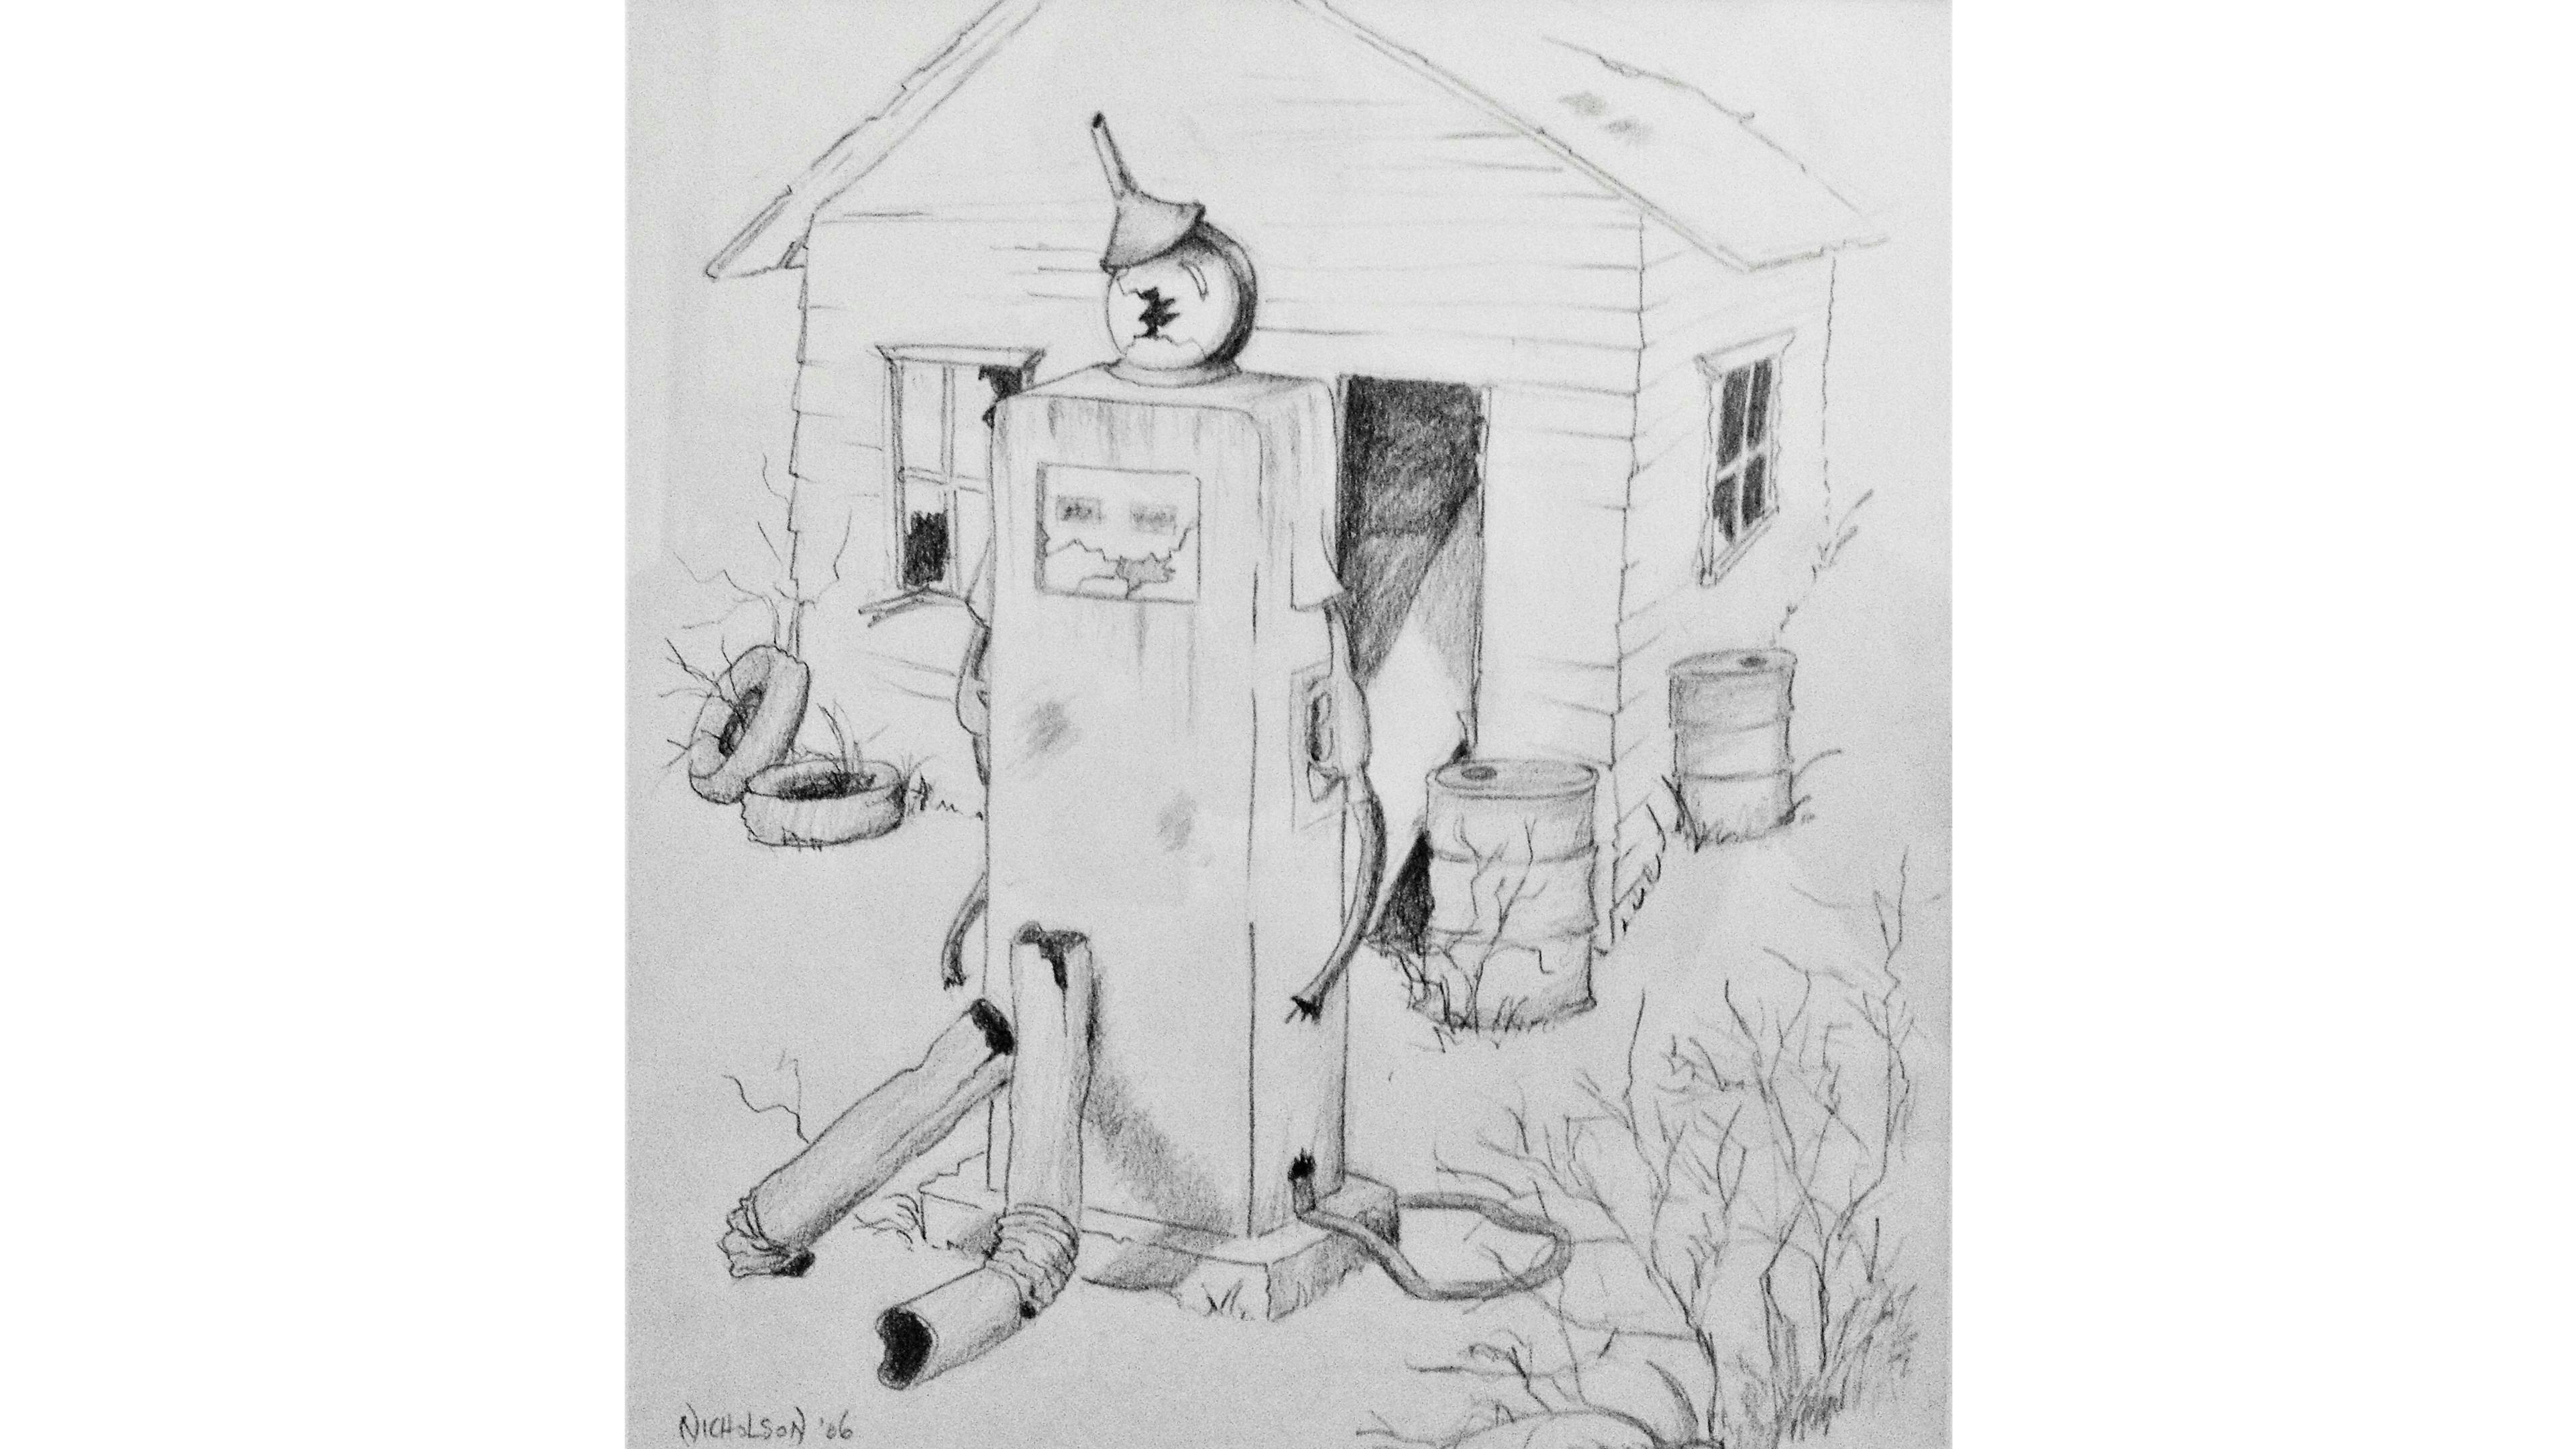 A sketch depicting the tin man who has become a derelict gas pump that remains abandoned and wasting away in front of its gas station counter parts, with weeds, old oil barrels and retired tires.